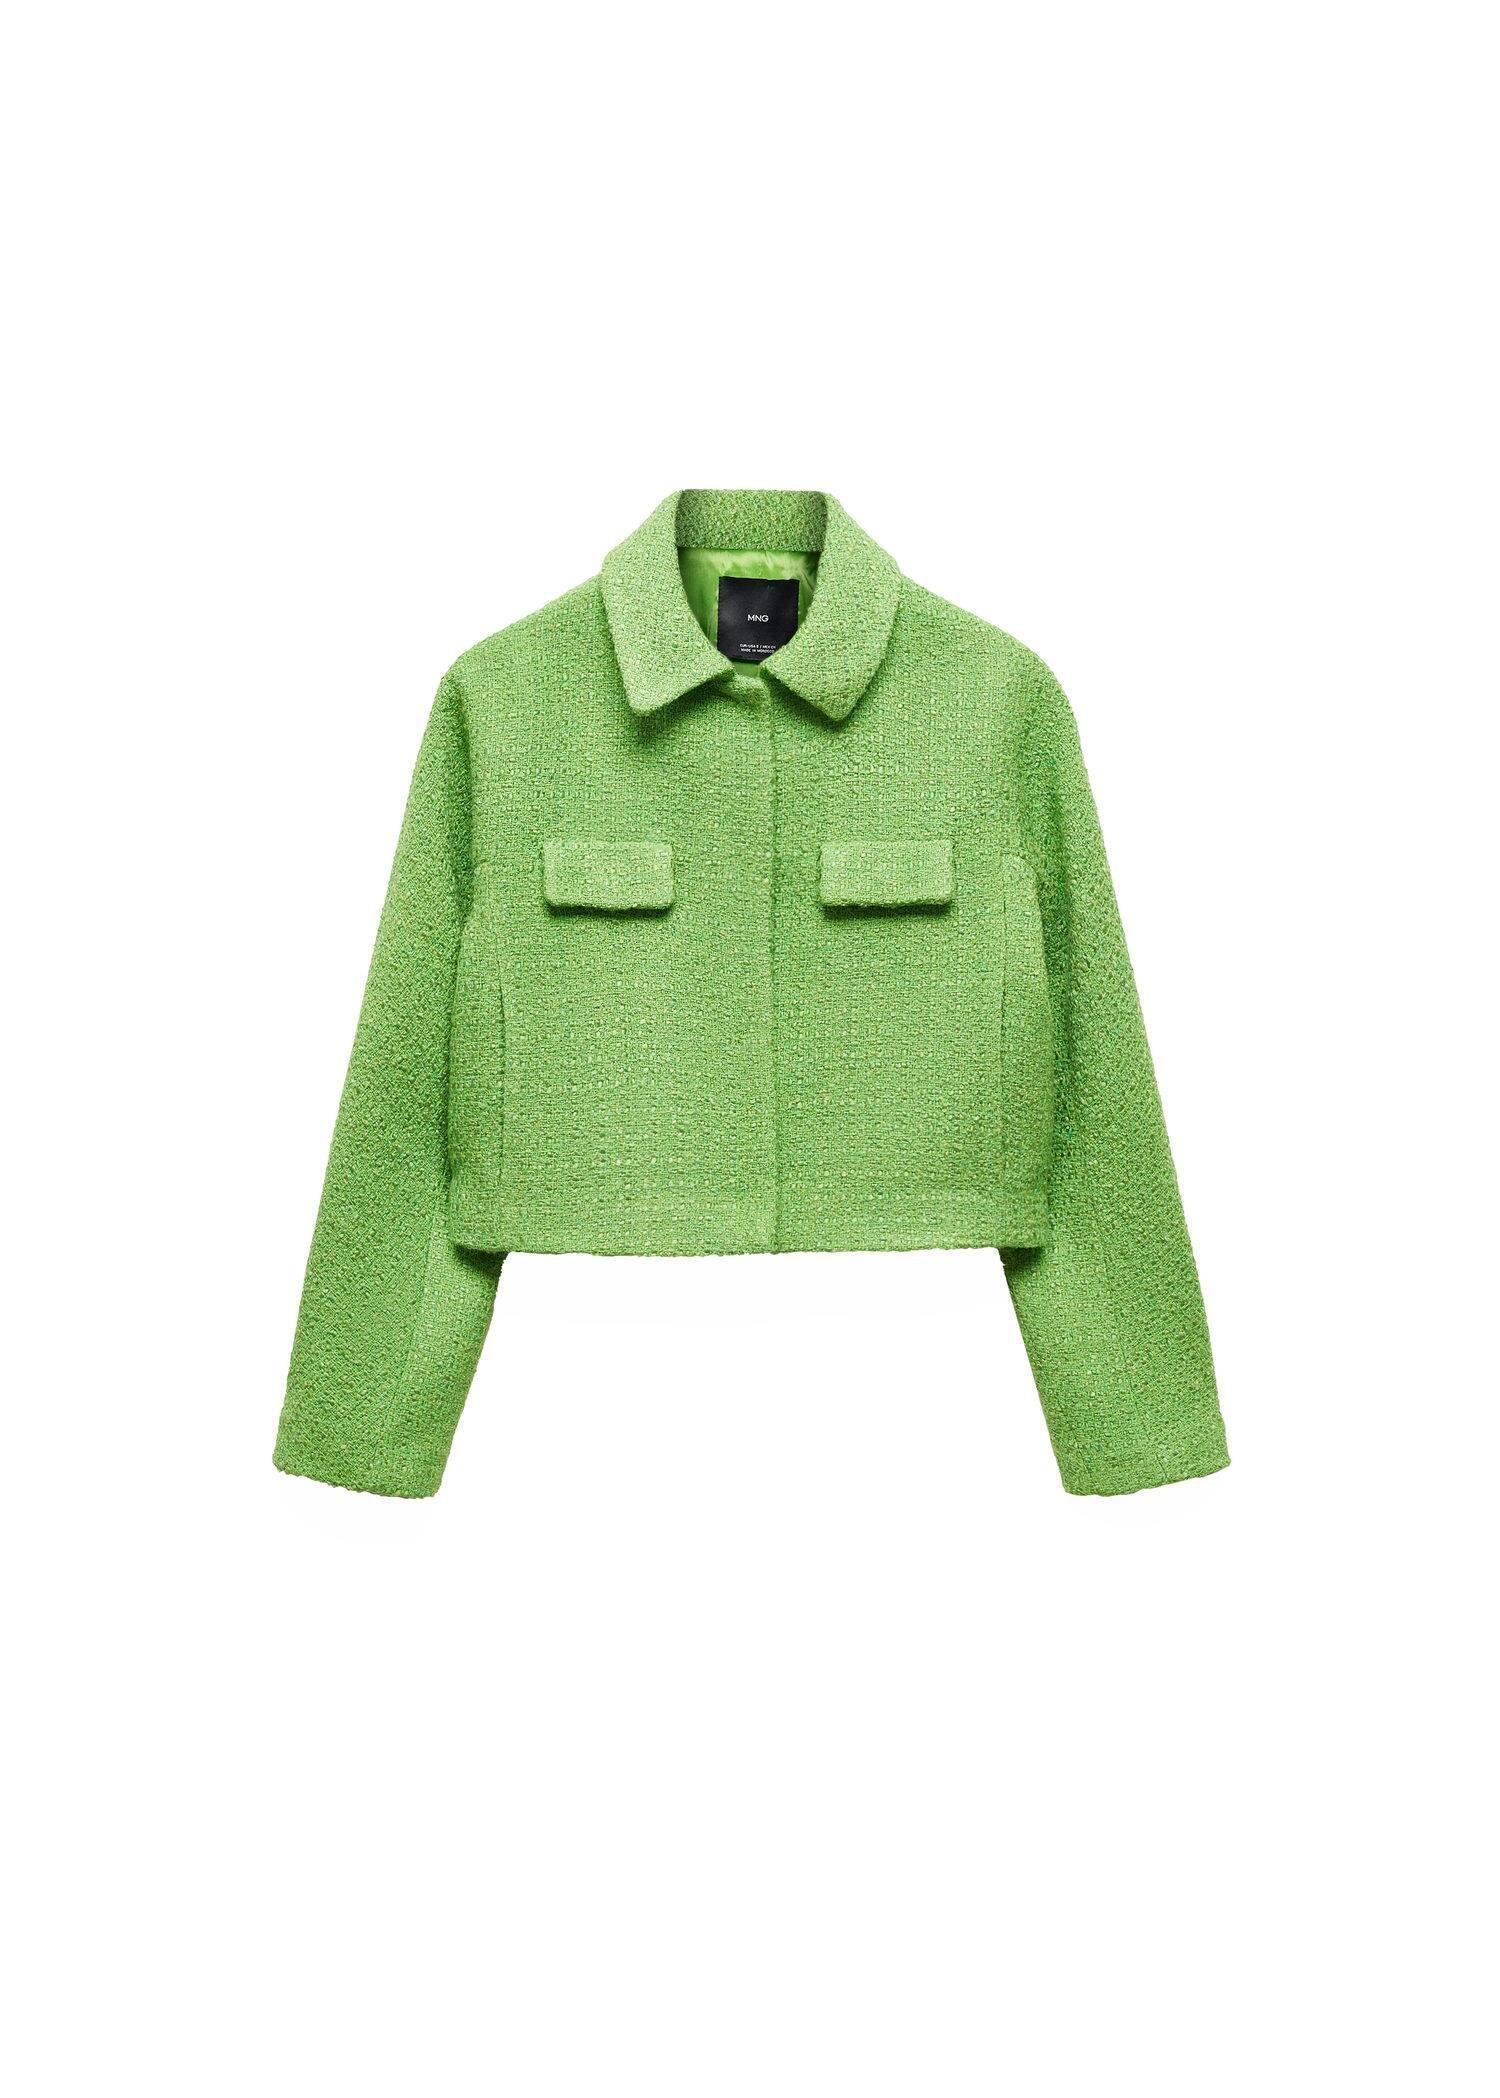 Mango - Green Cropped Tweed Jacket With Pockets